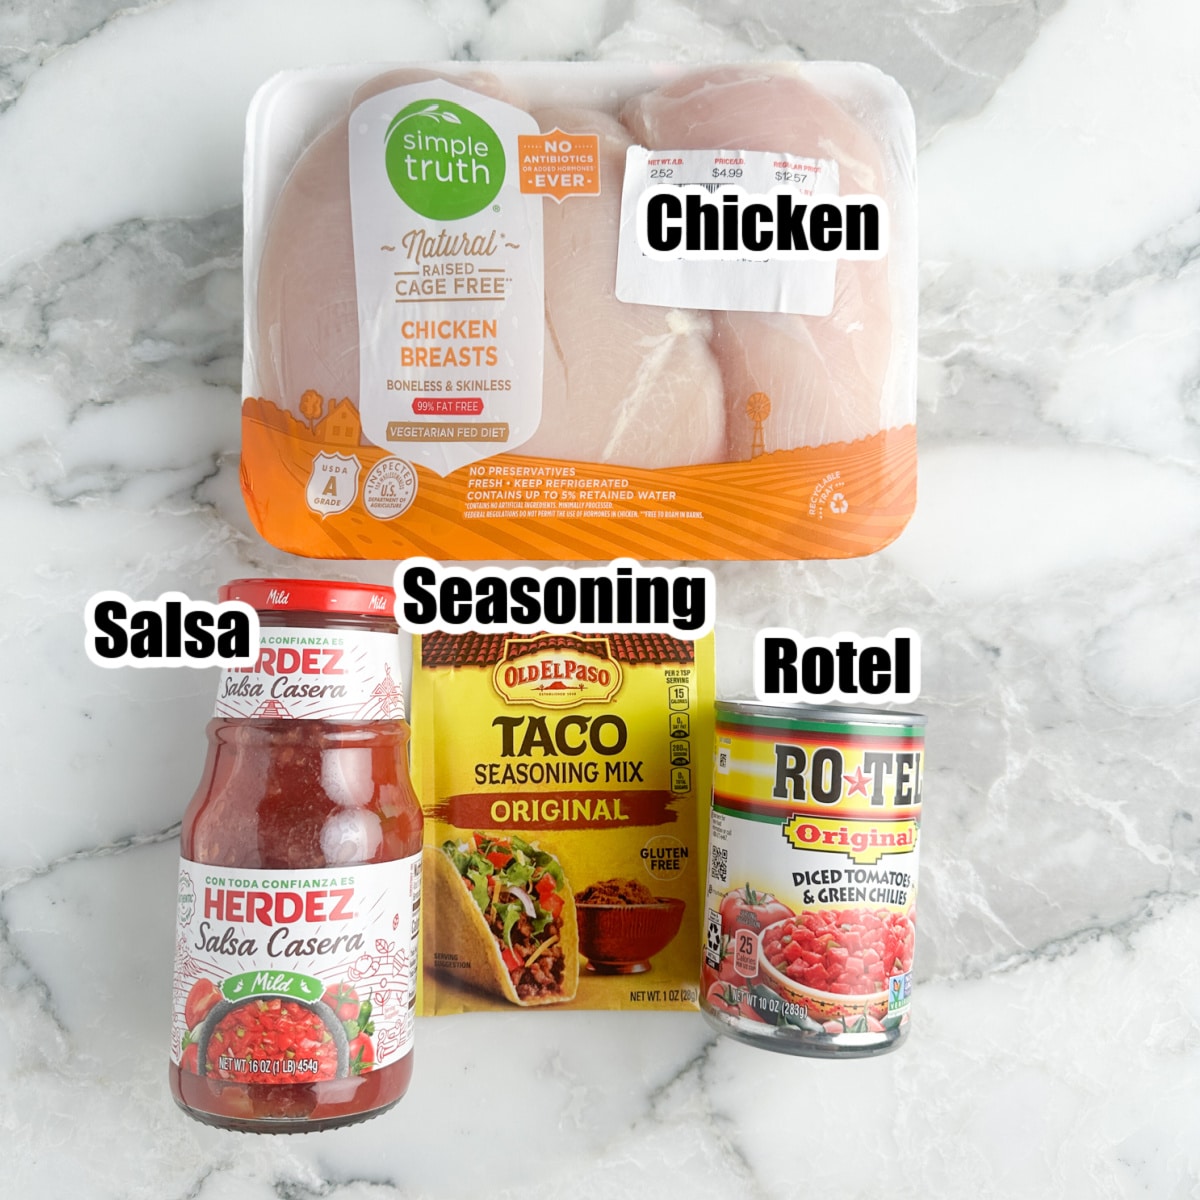 Pack of chicken, jar of salsa, Rotel, and taco seasoning. 